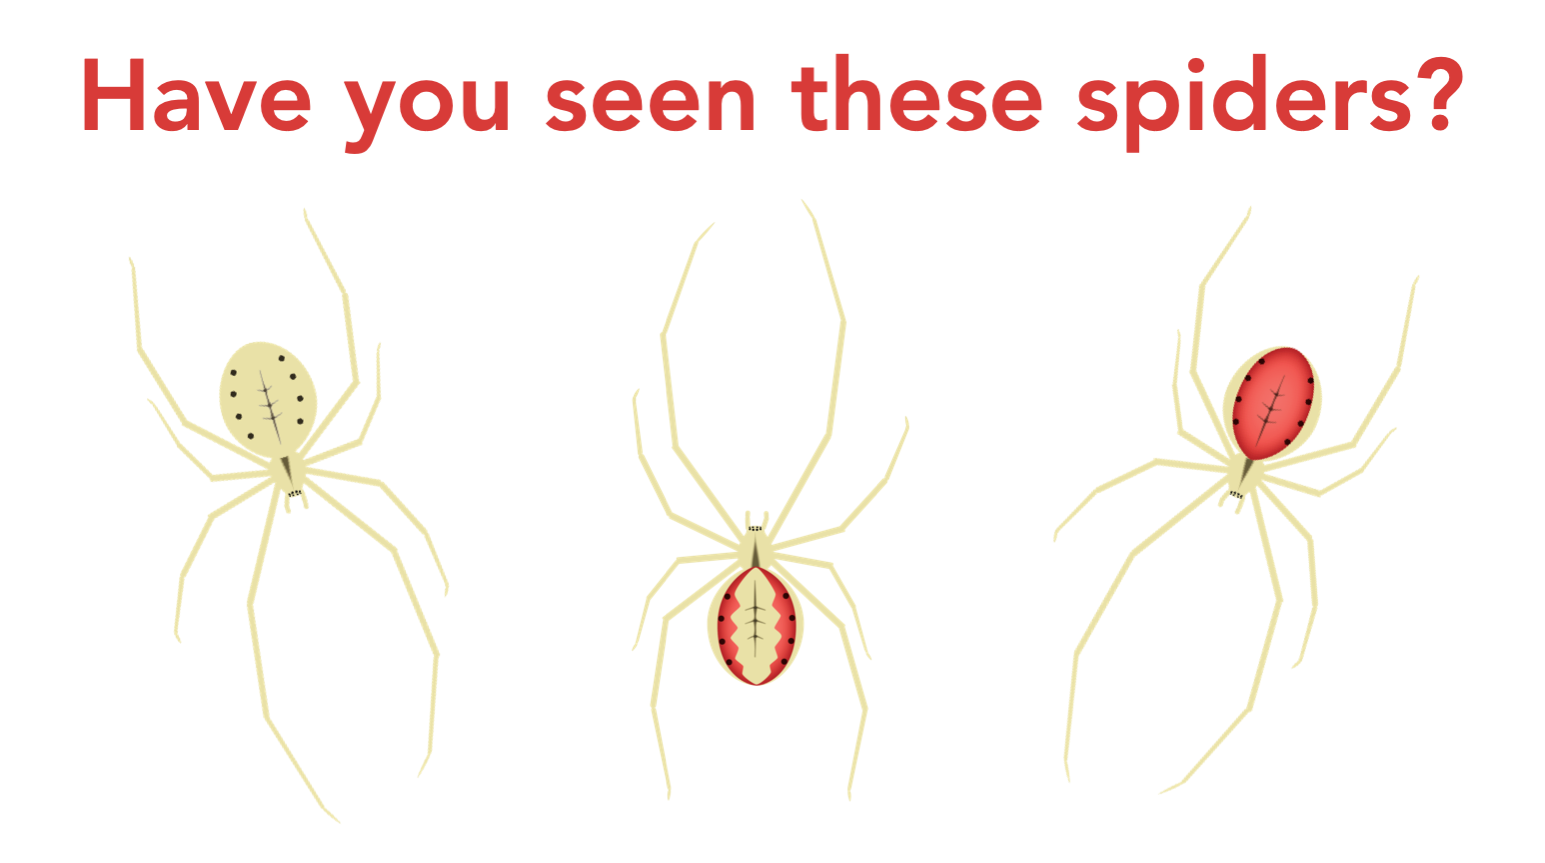 Illustration of three pale yellow spiders, one with no red, one with two red stripes on the abdomen, and one with an entirely red abdomen. Red text reads: "Have you seen these spiders?"